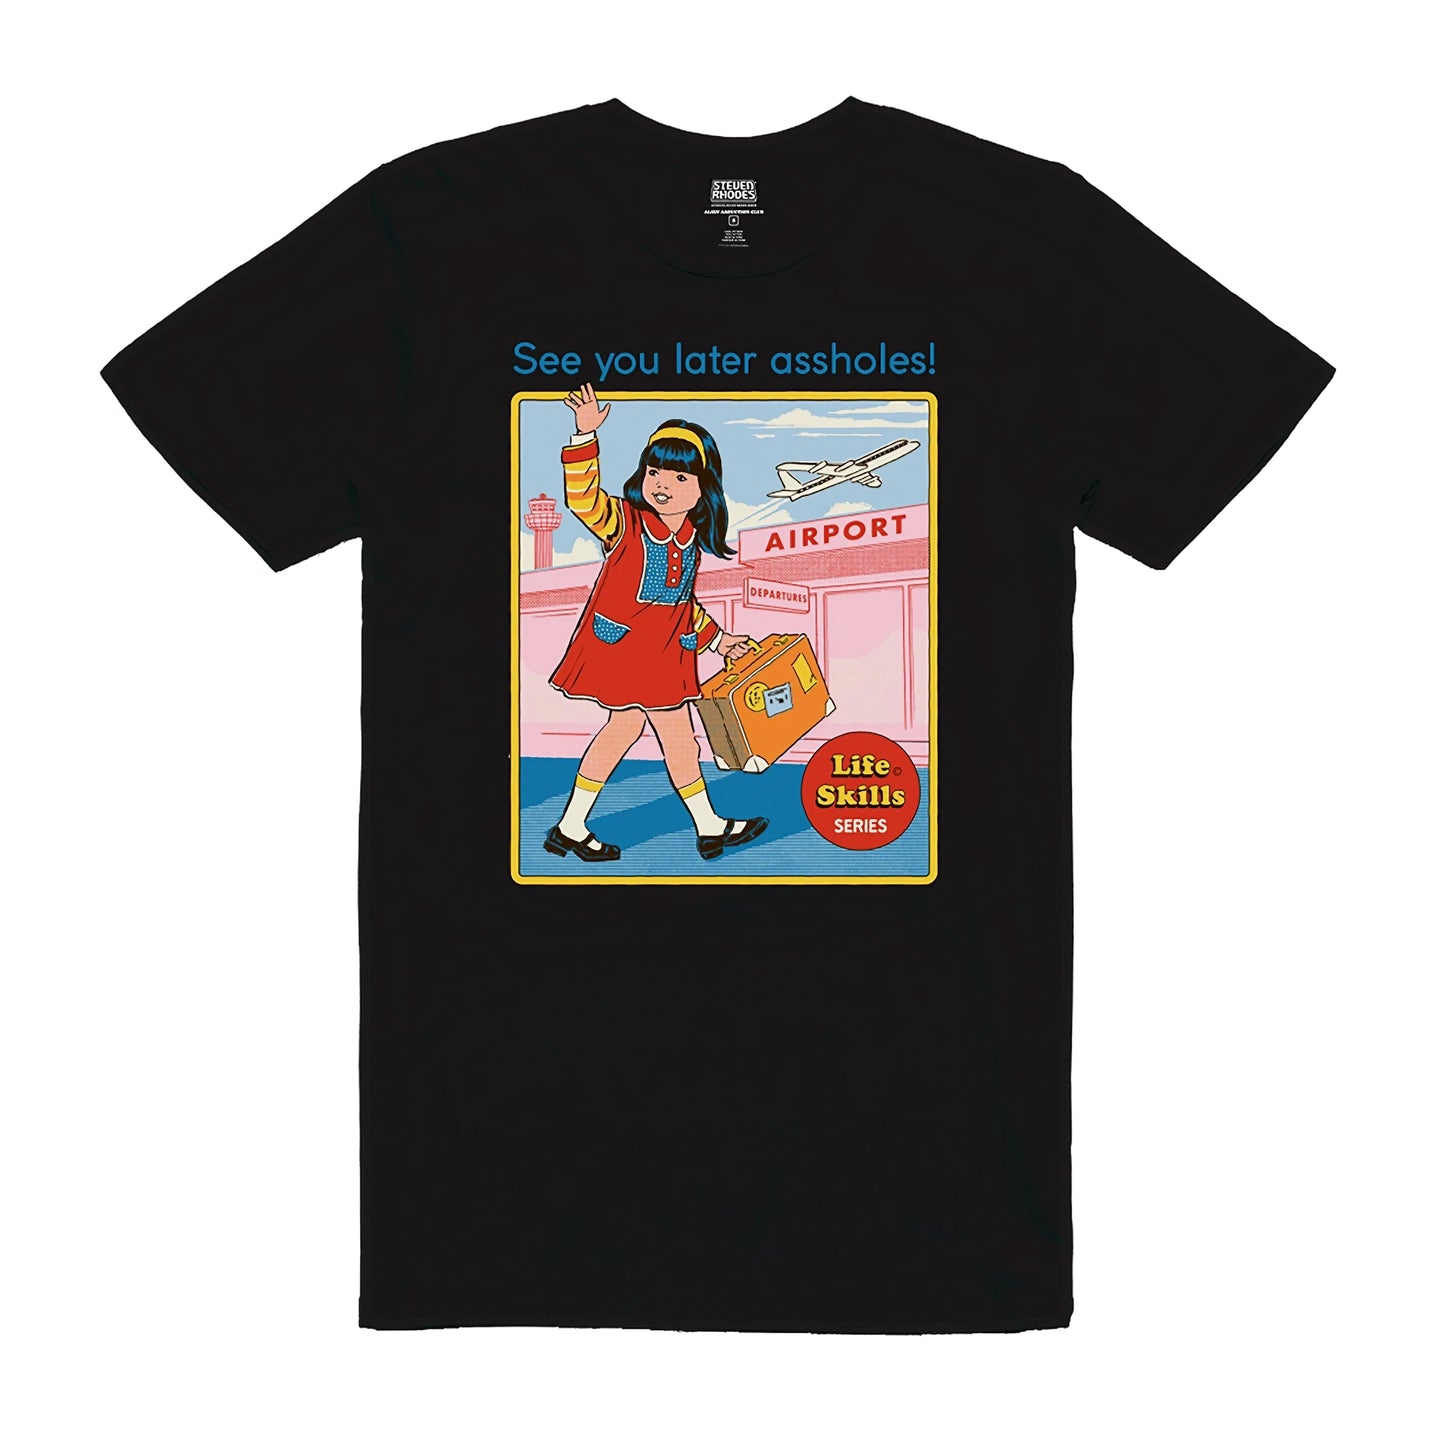 STEVEN RHODES 'See You Later Assholes' T-Shirt featuring a retro-style illustration